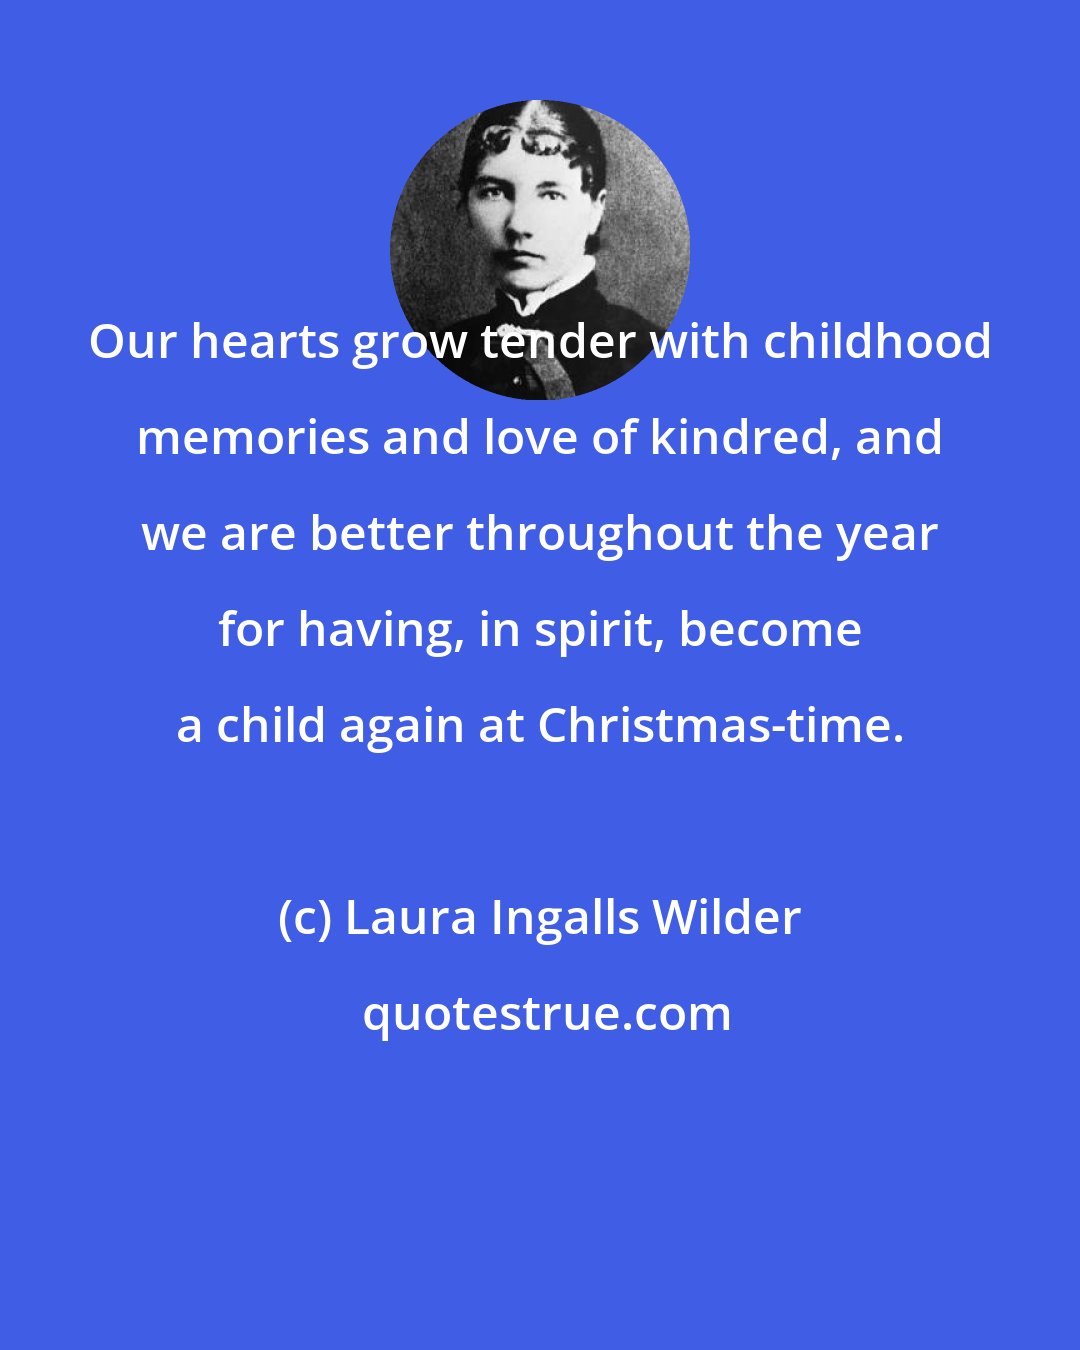 Laura Ingalls Wilder: Our hearts grow tender with childhood memories and love of kindred, and we are better throughout the year for having, in spirit, become a child again at Christmas-time.